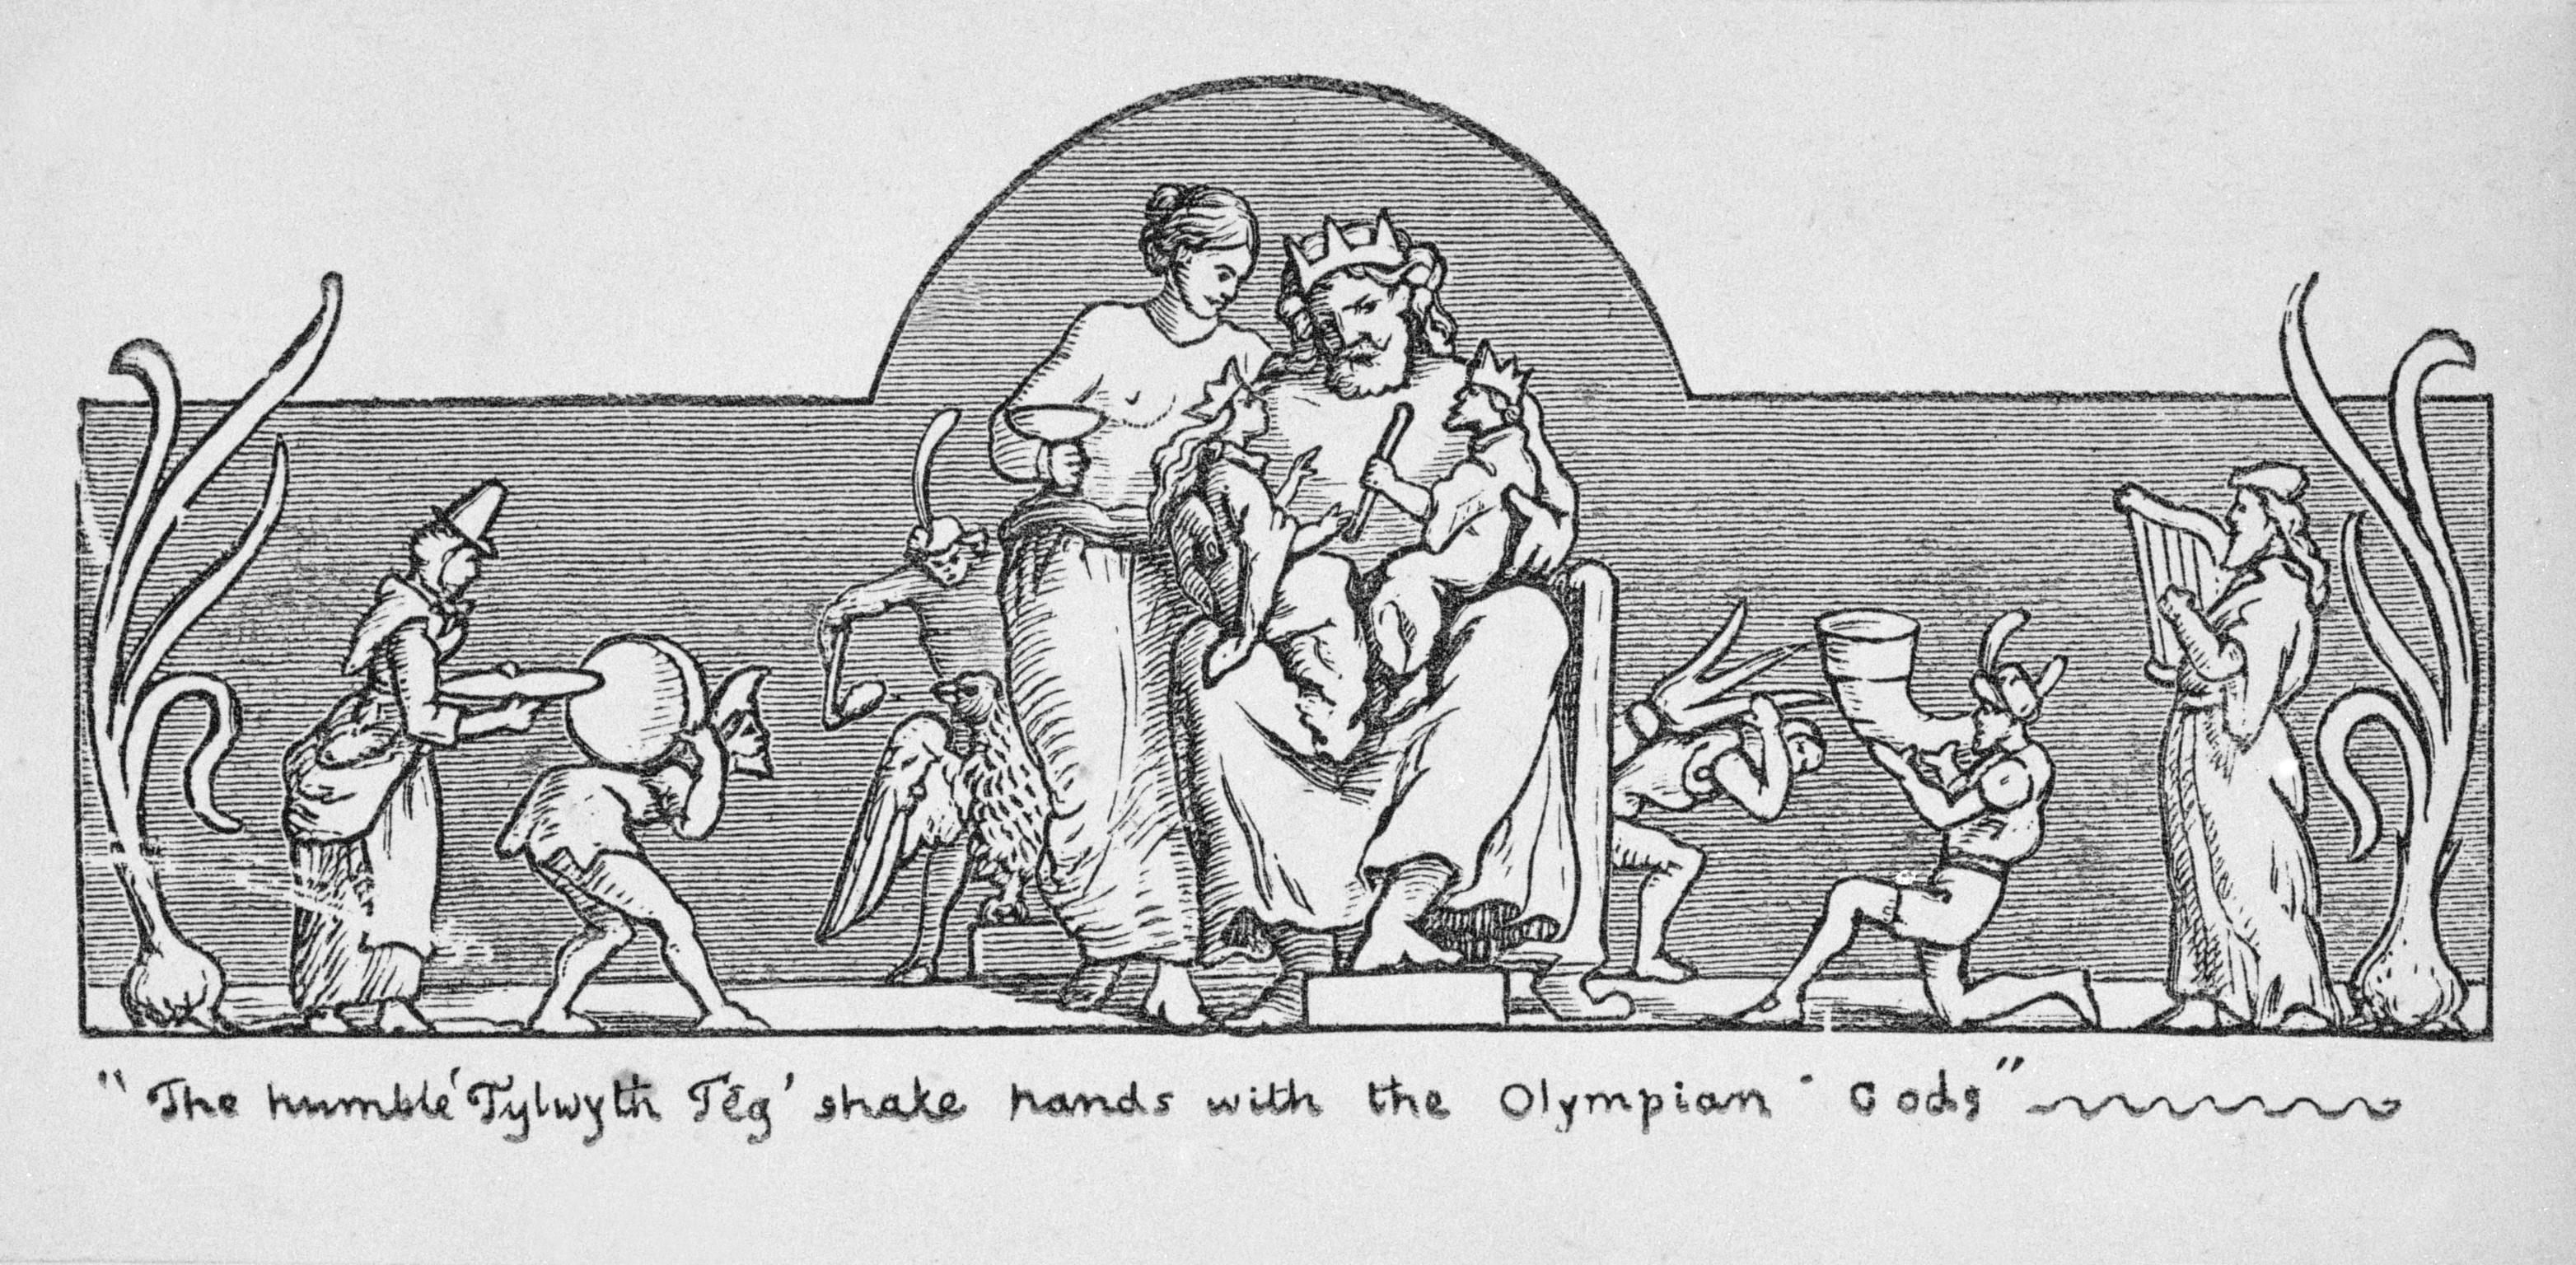 The Humble Tylwyth Teg shakes hands with the Olympian Gods